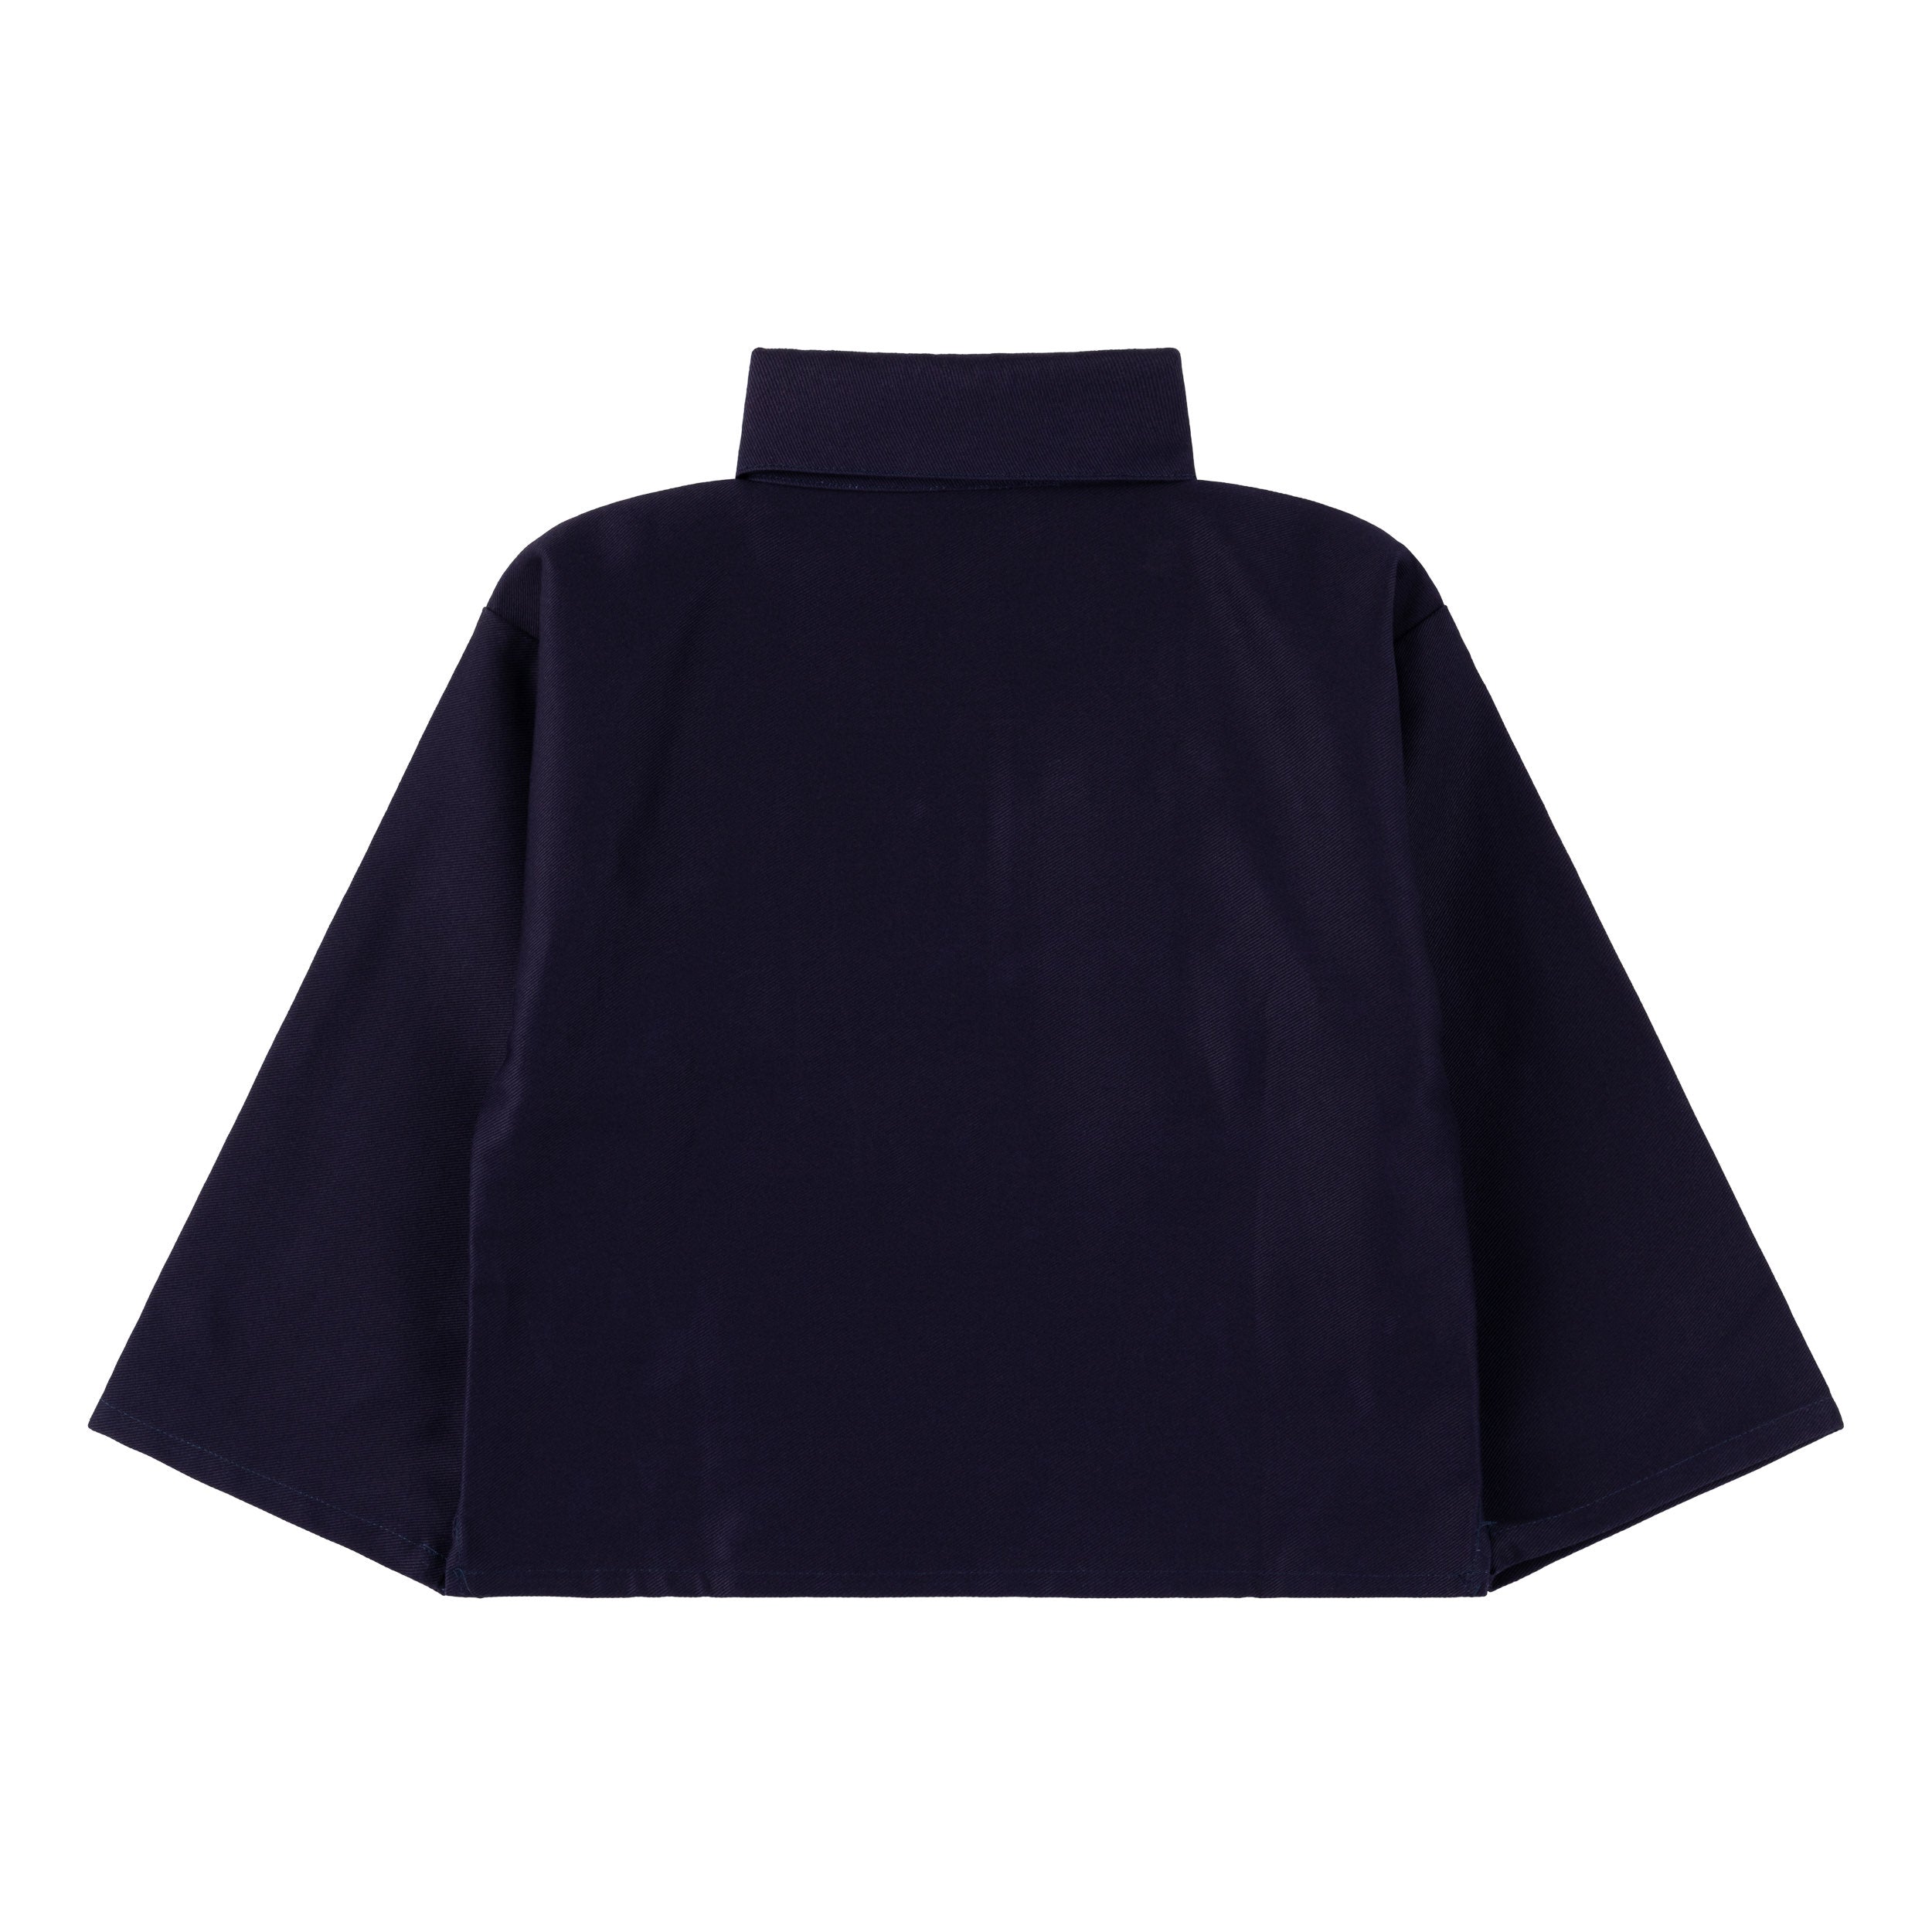 Carrier Company Child's Traditional Smock in Navy